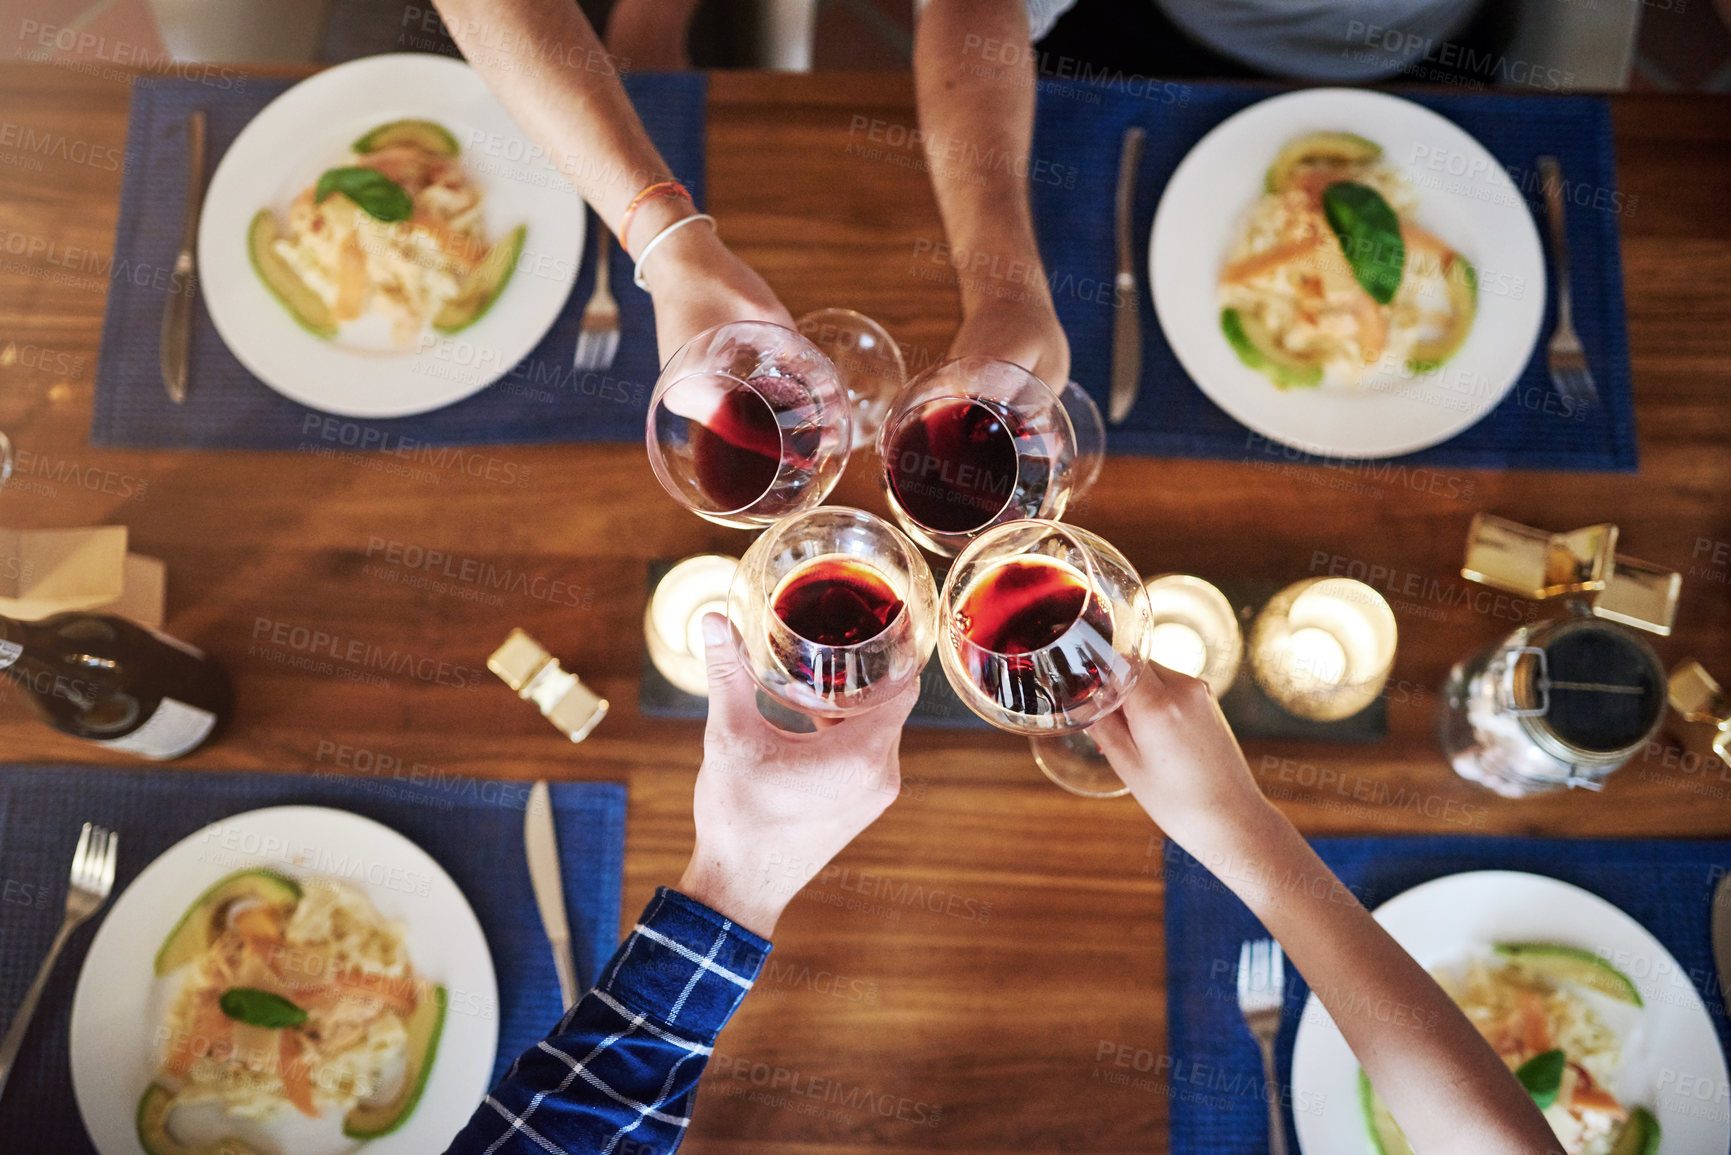 Buy stock photo High angle shot of a group of unrecognizable people toasting at the dining room table at home